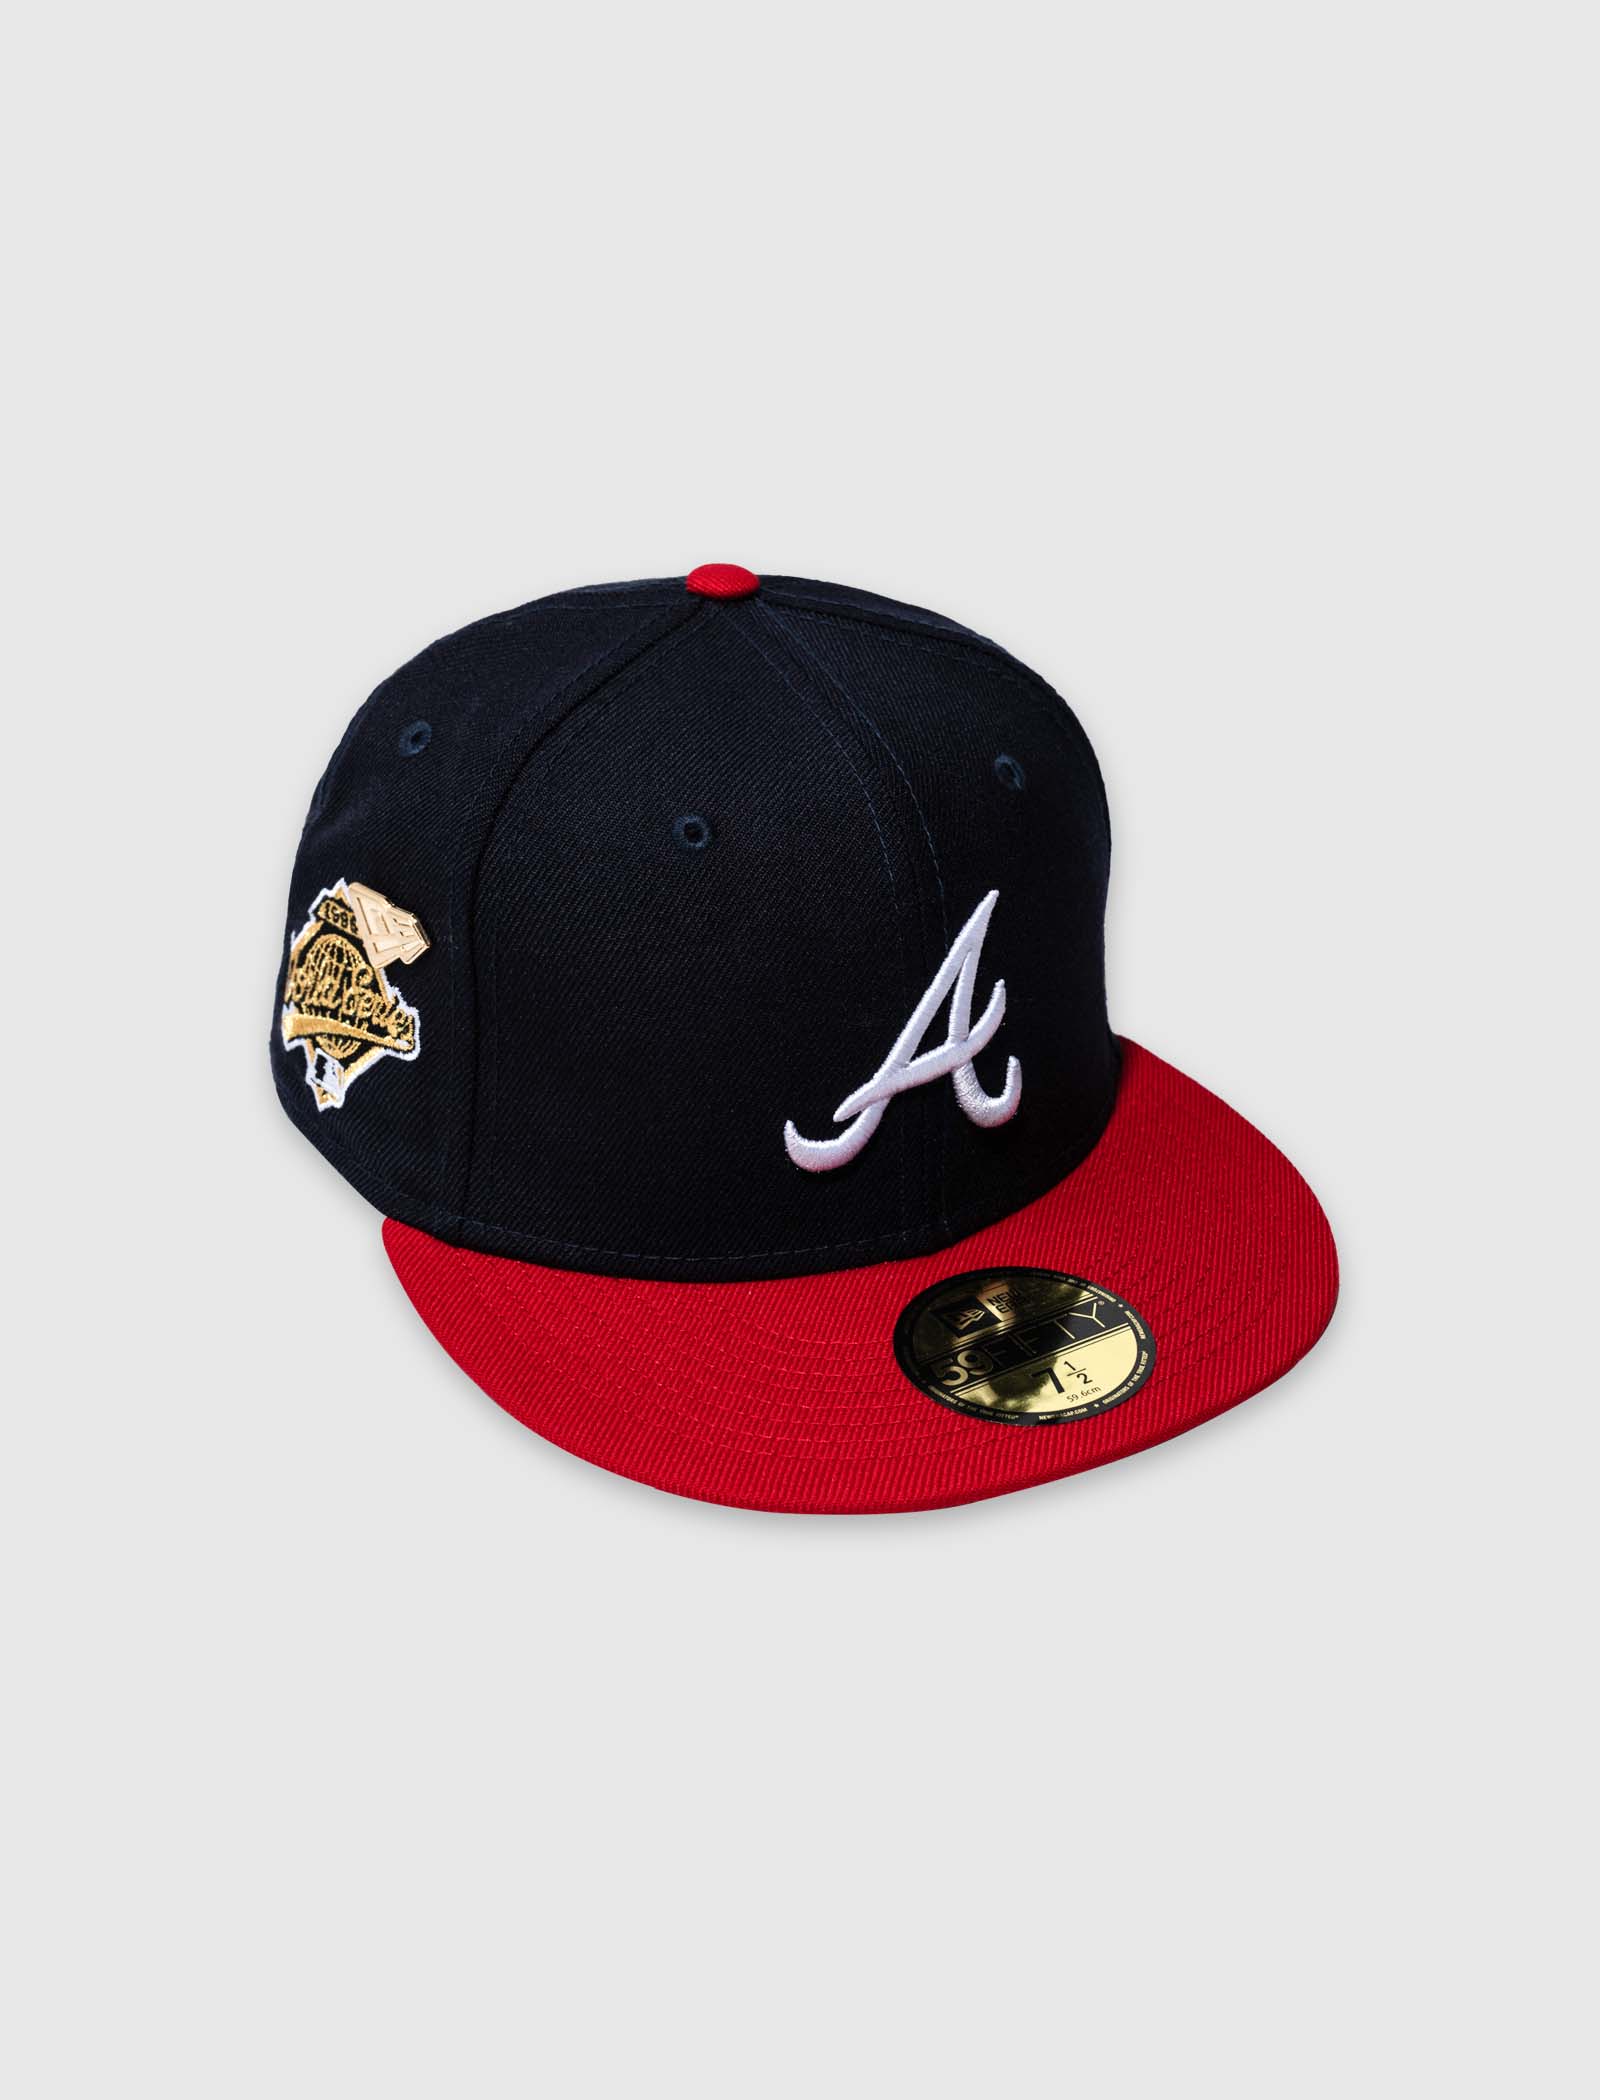 ATL BRAVES FITTED CAP